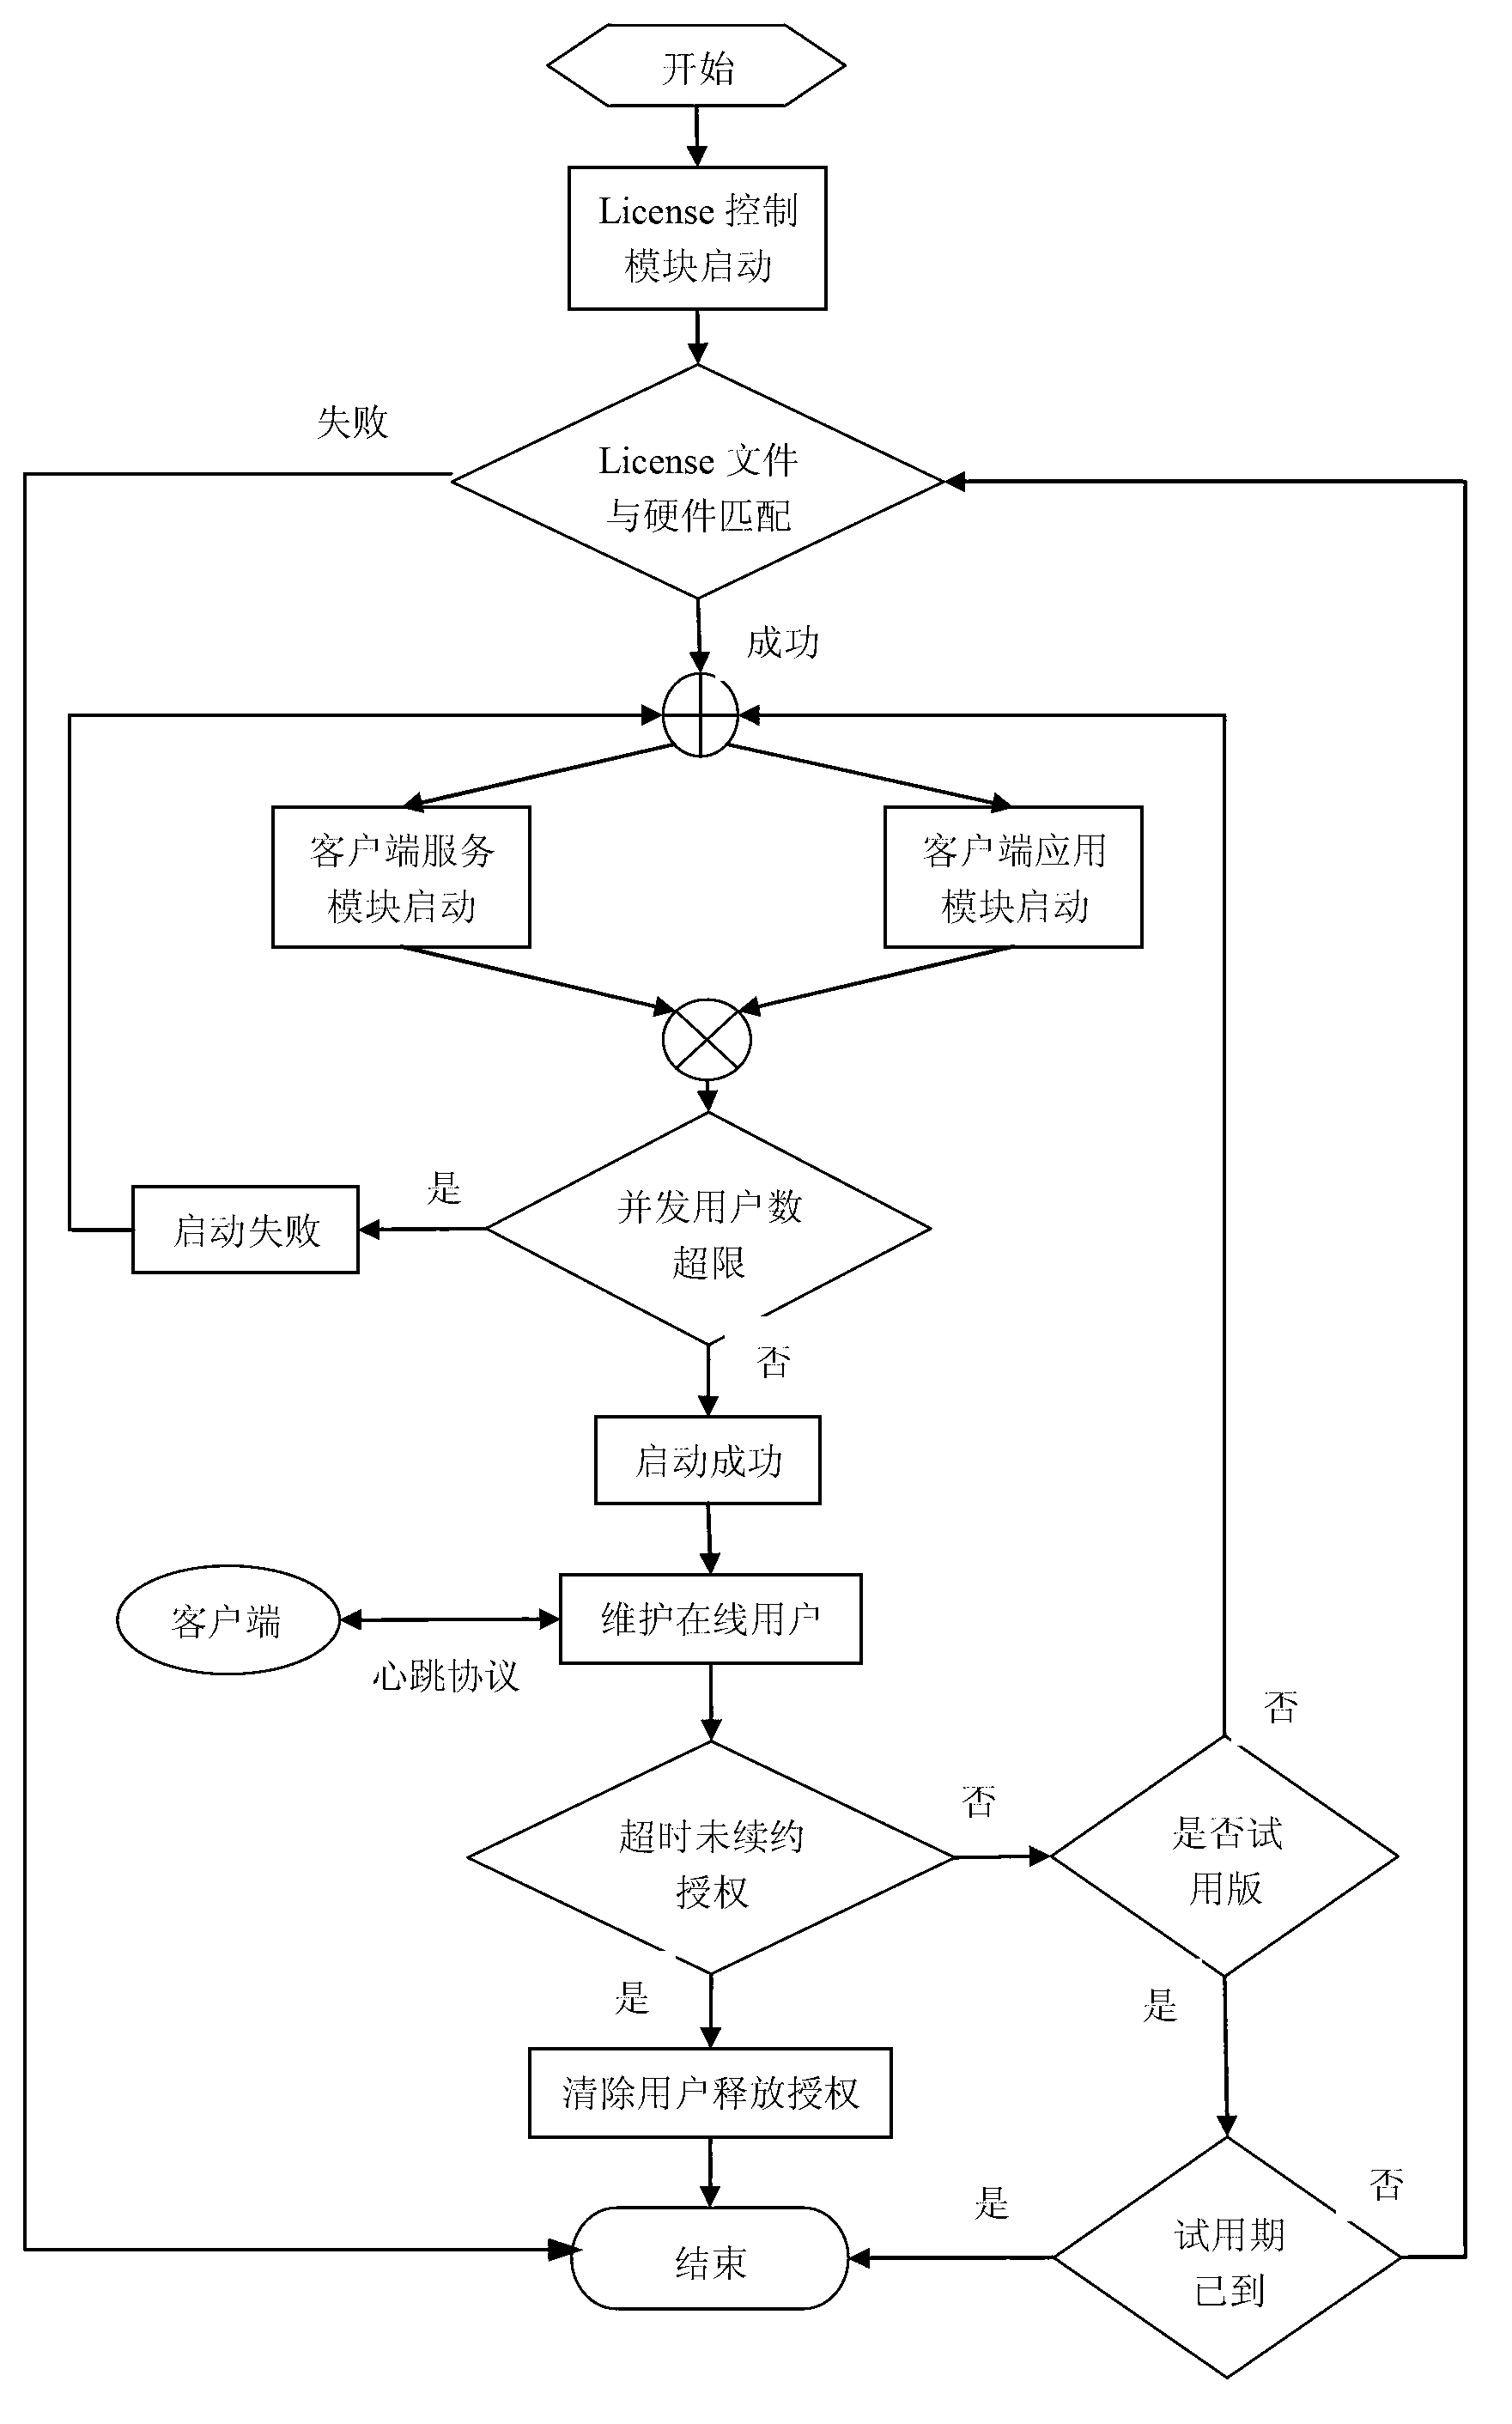 Real-time authorization software License control method